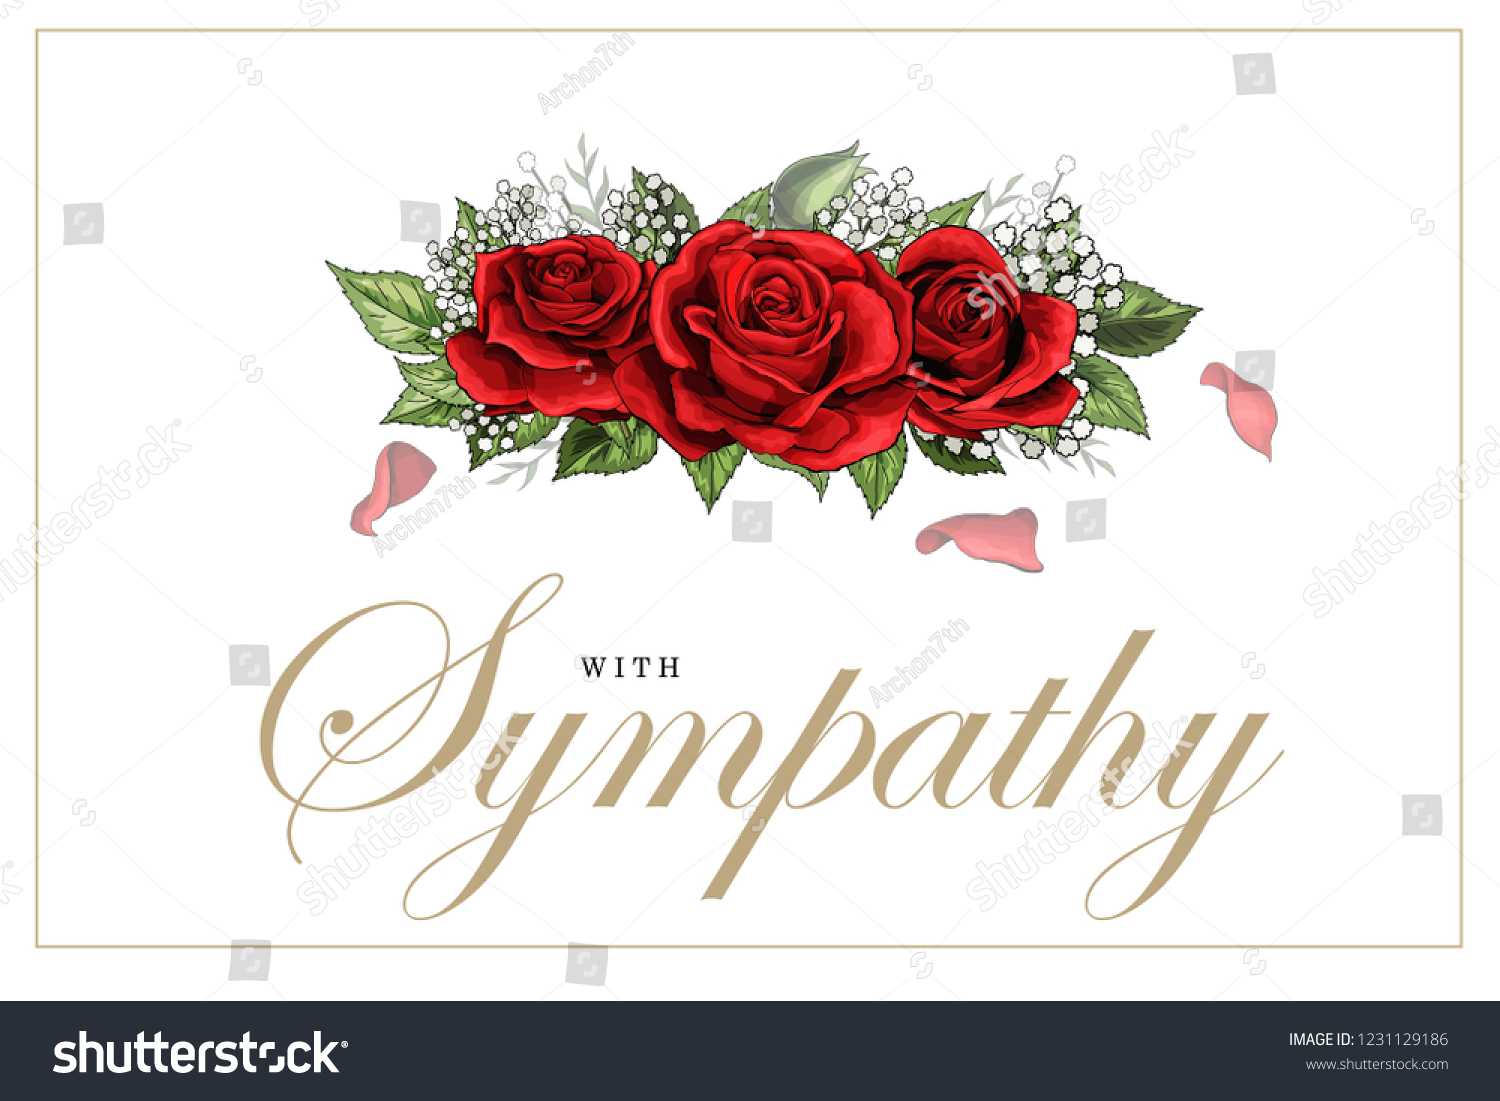 Condolences Sympathy Card Floral Red Roses Stock Vector Pertaining To Sympathy Card Template